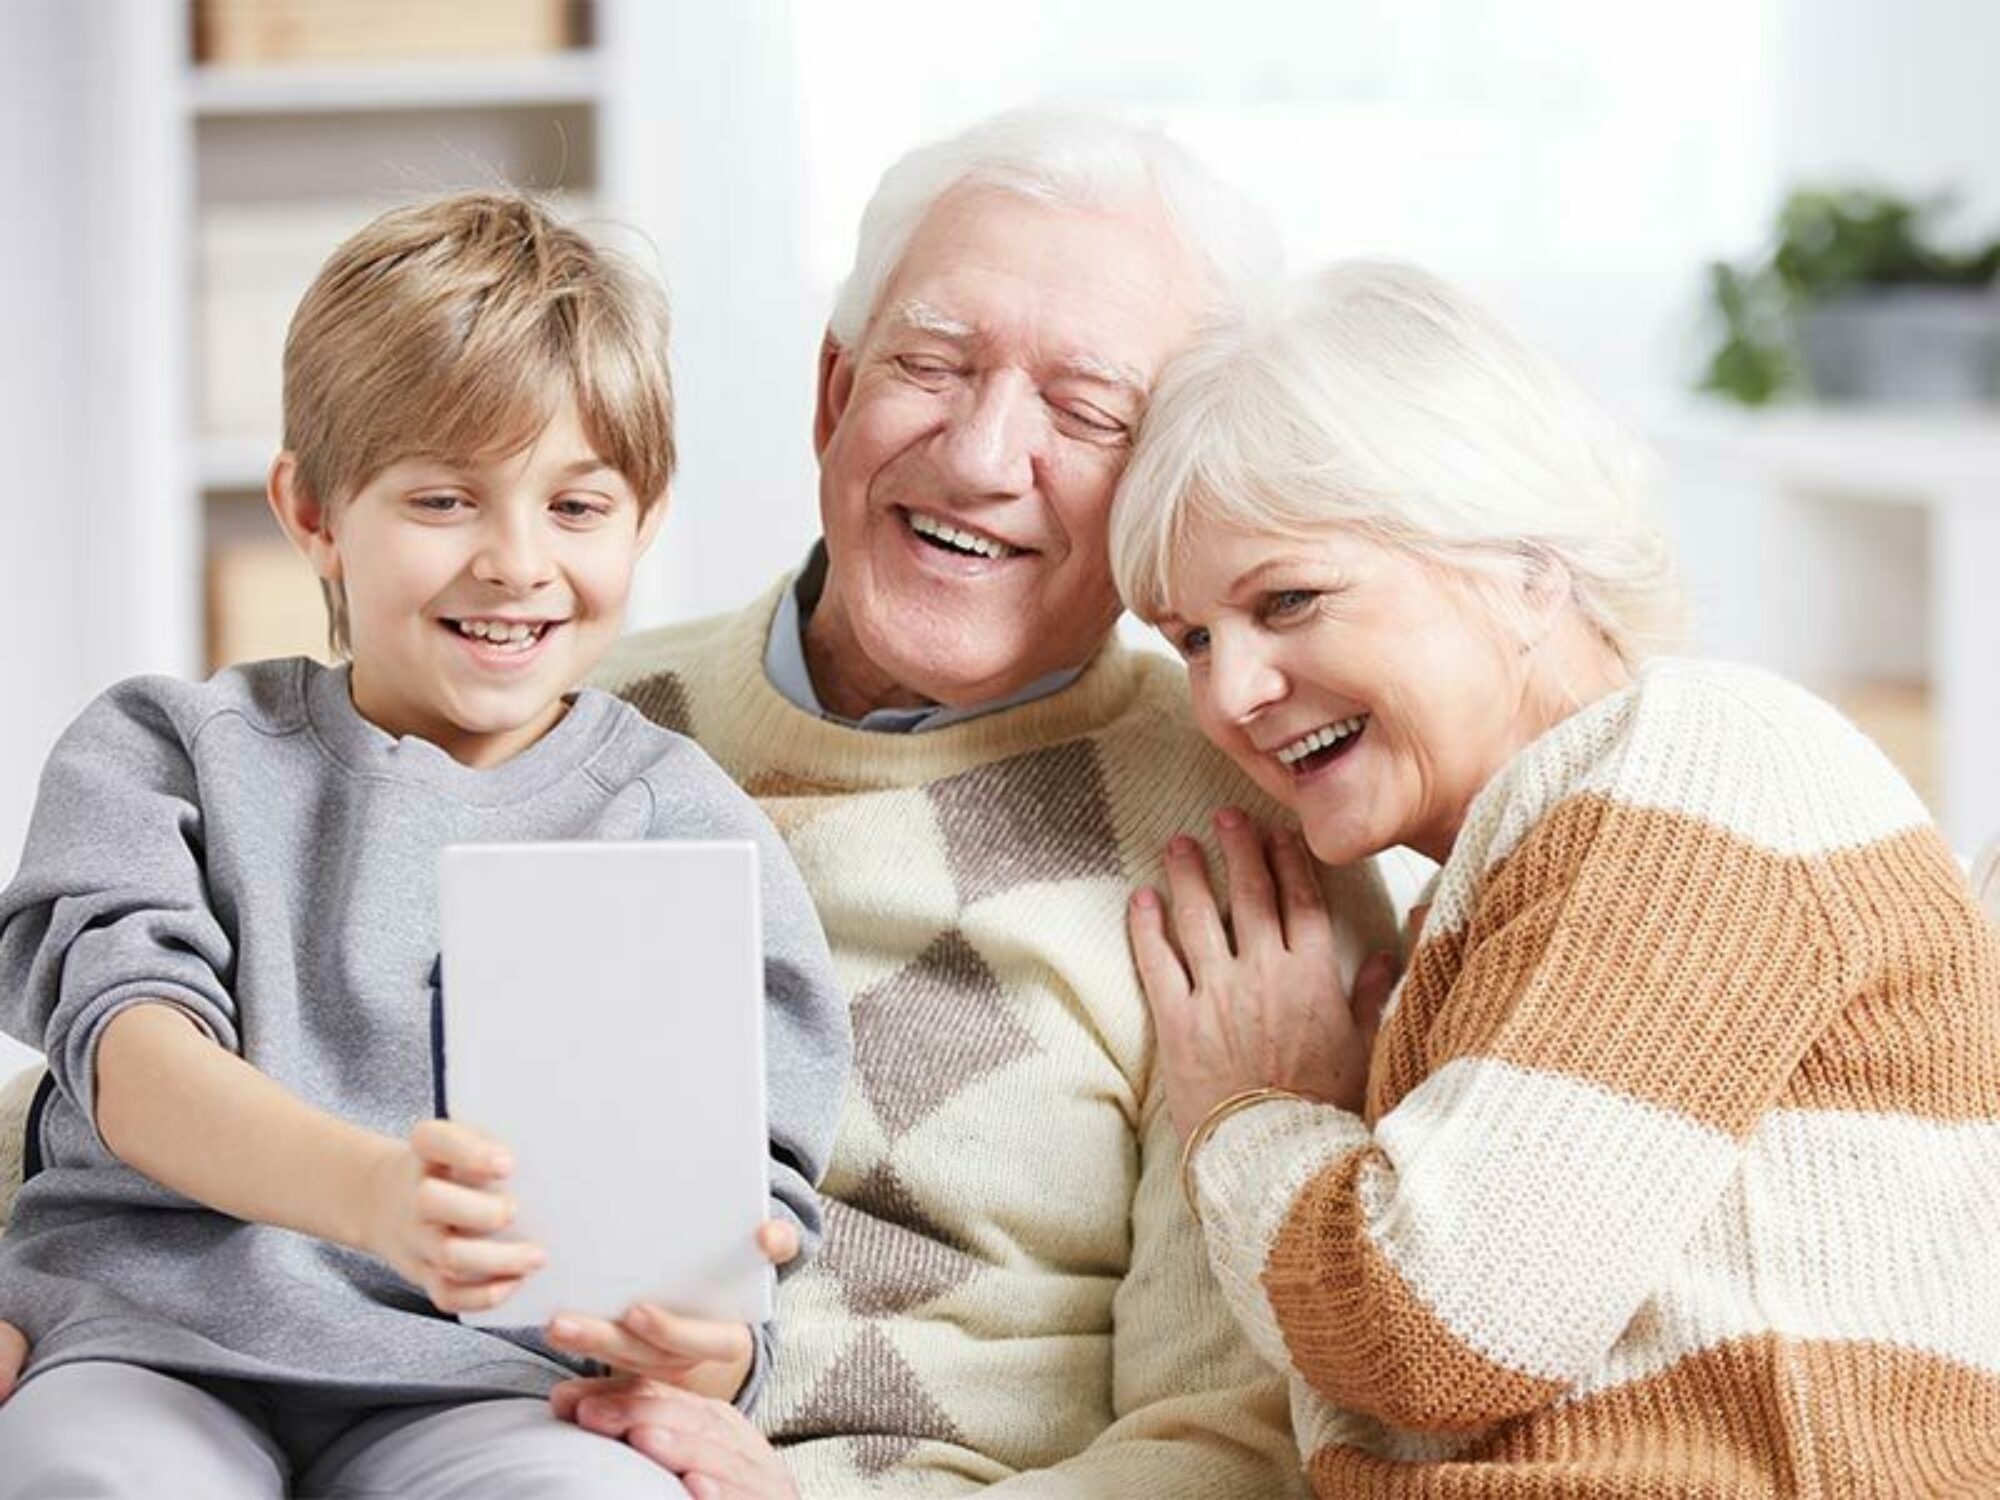 Grandparents with their grandson looking at a tablet